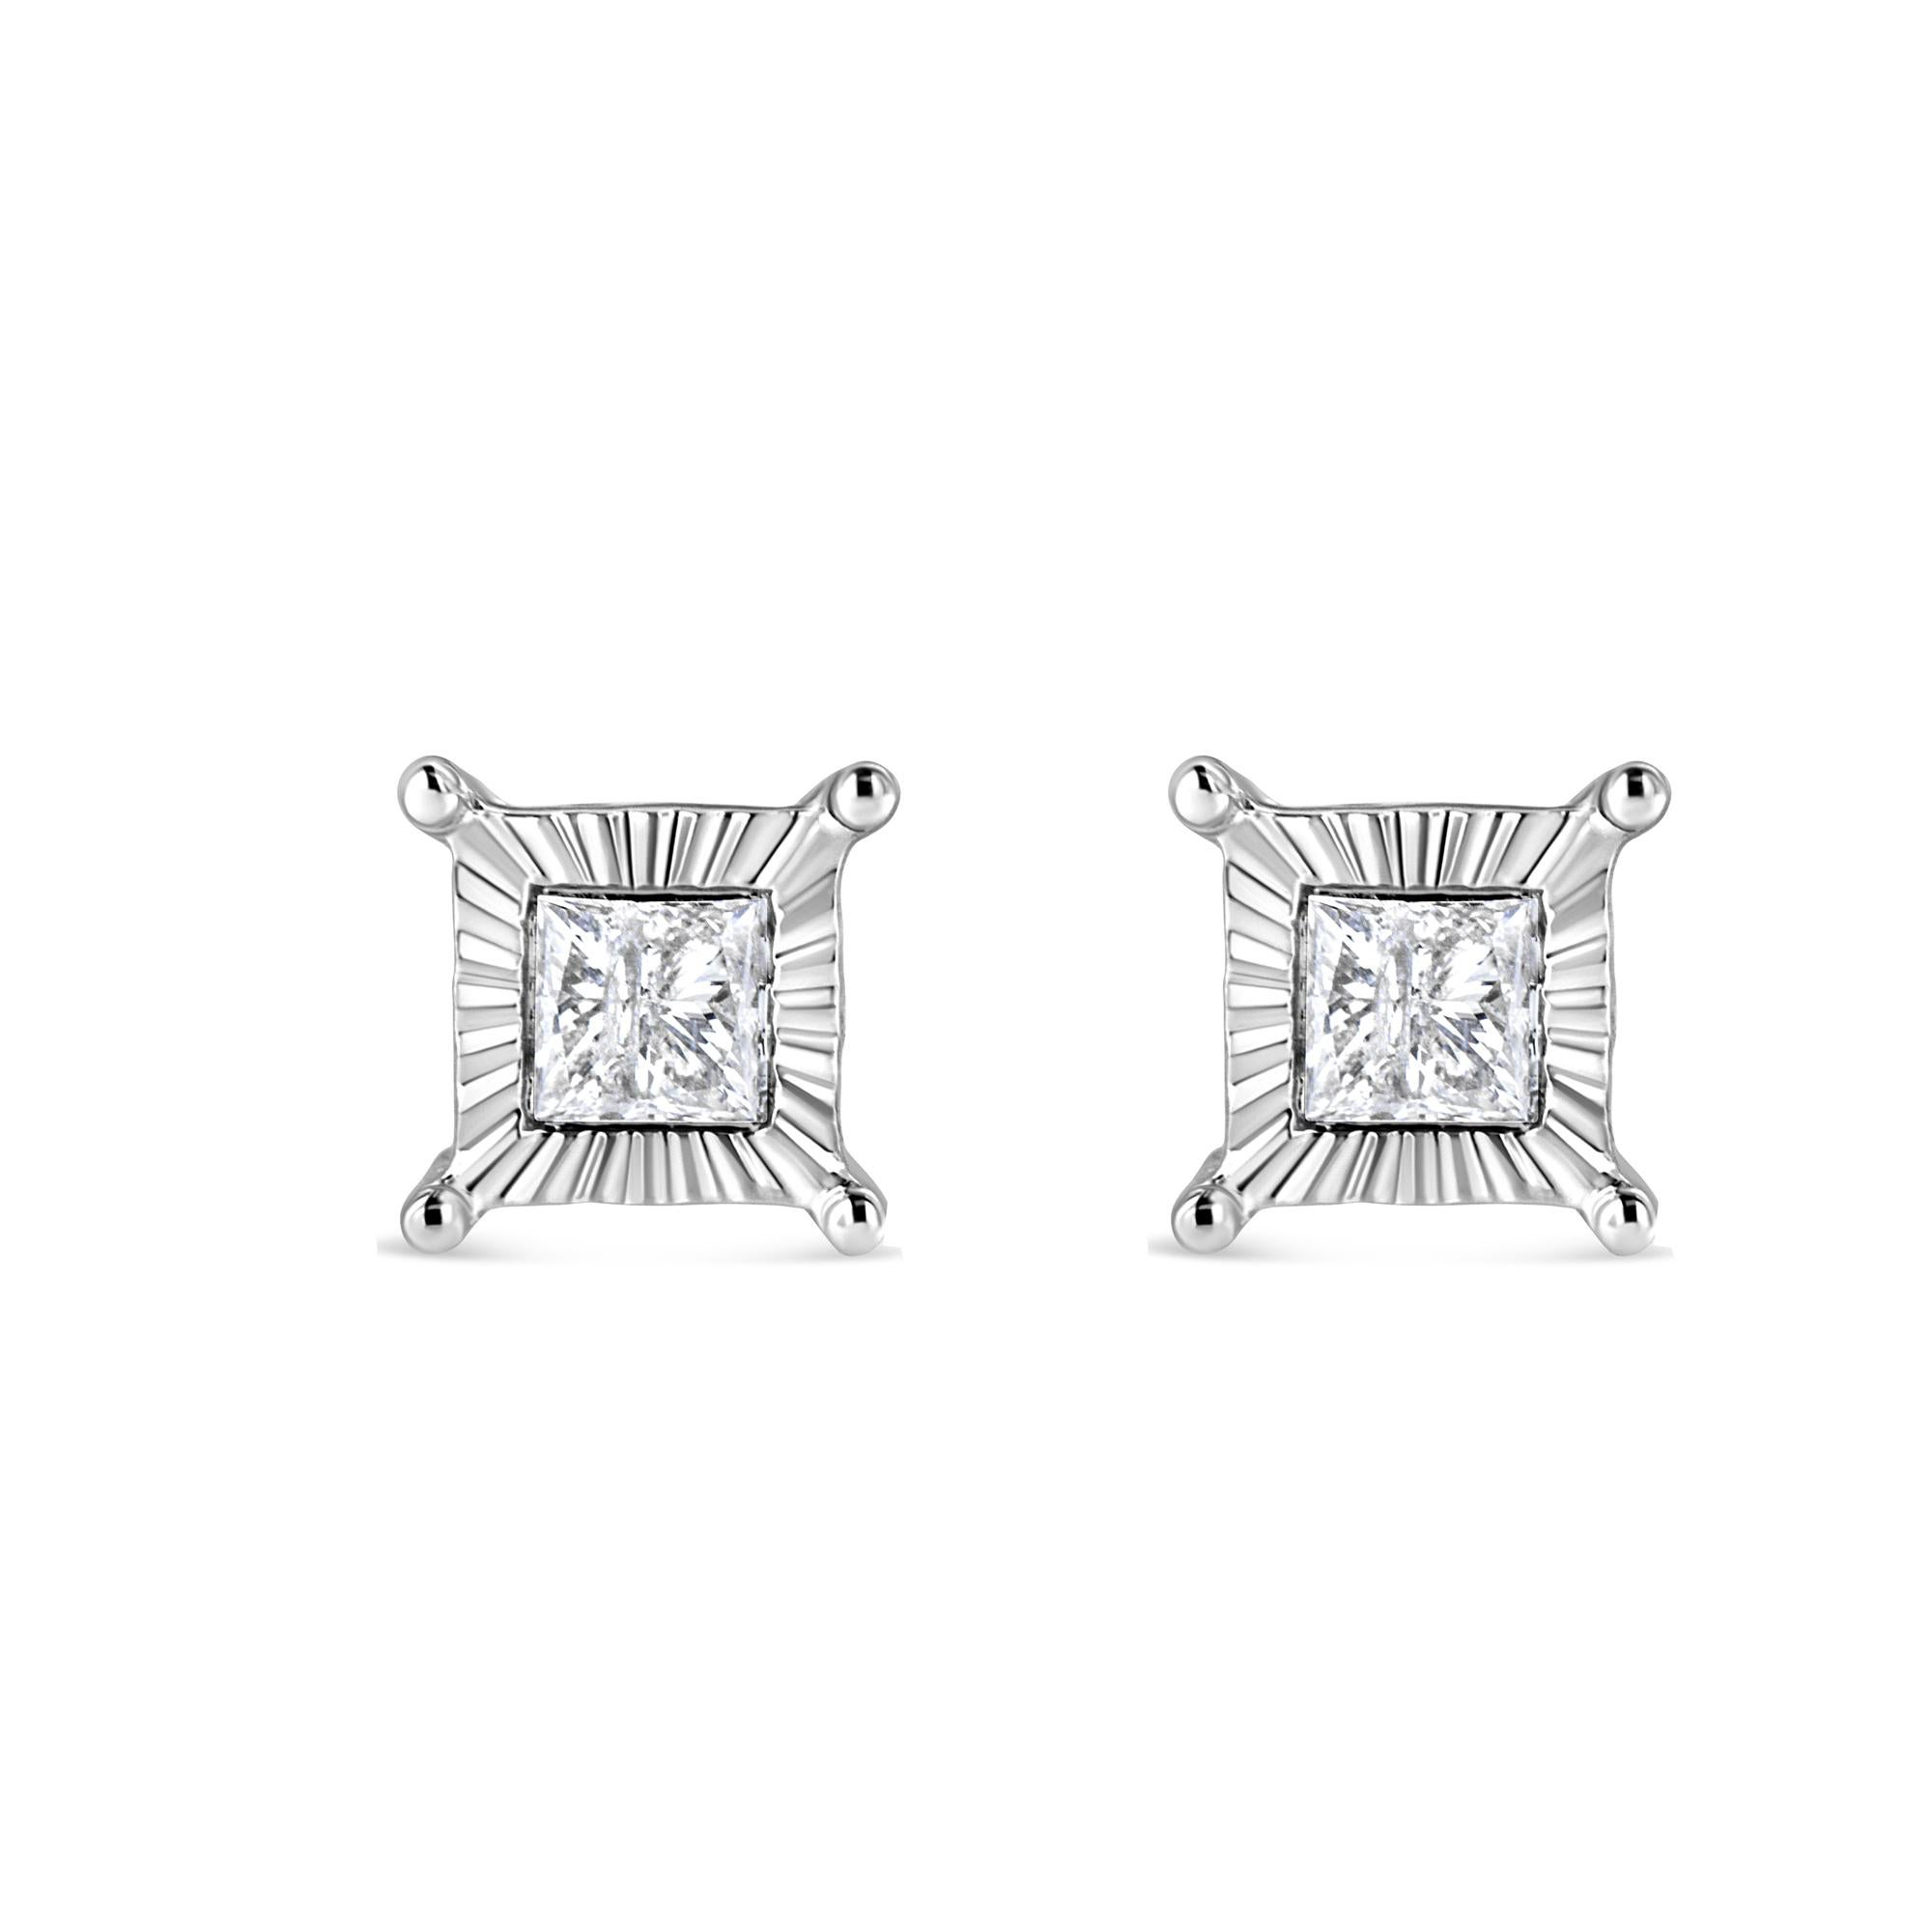 These earrings are a must have for every woman. These fabulous princess cut diamond earrings are crafted in the finest .925 sterling silver, plated with rhodium (a platinum-family metal) for a lifetime of tarnish-free wear. Each stud showcases a